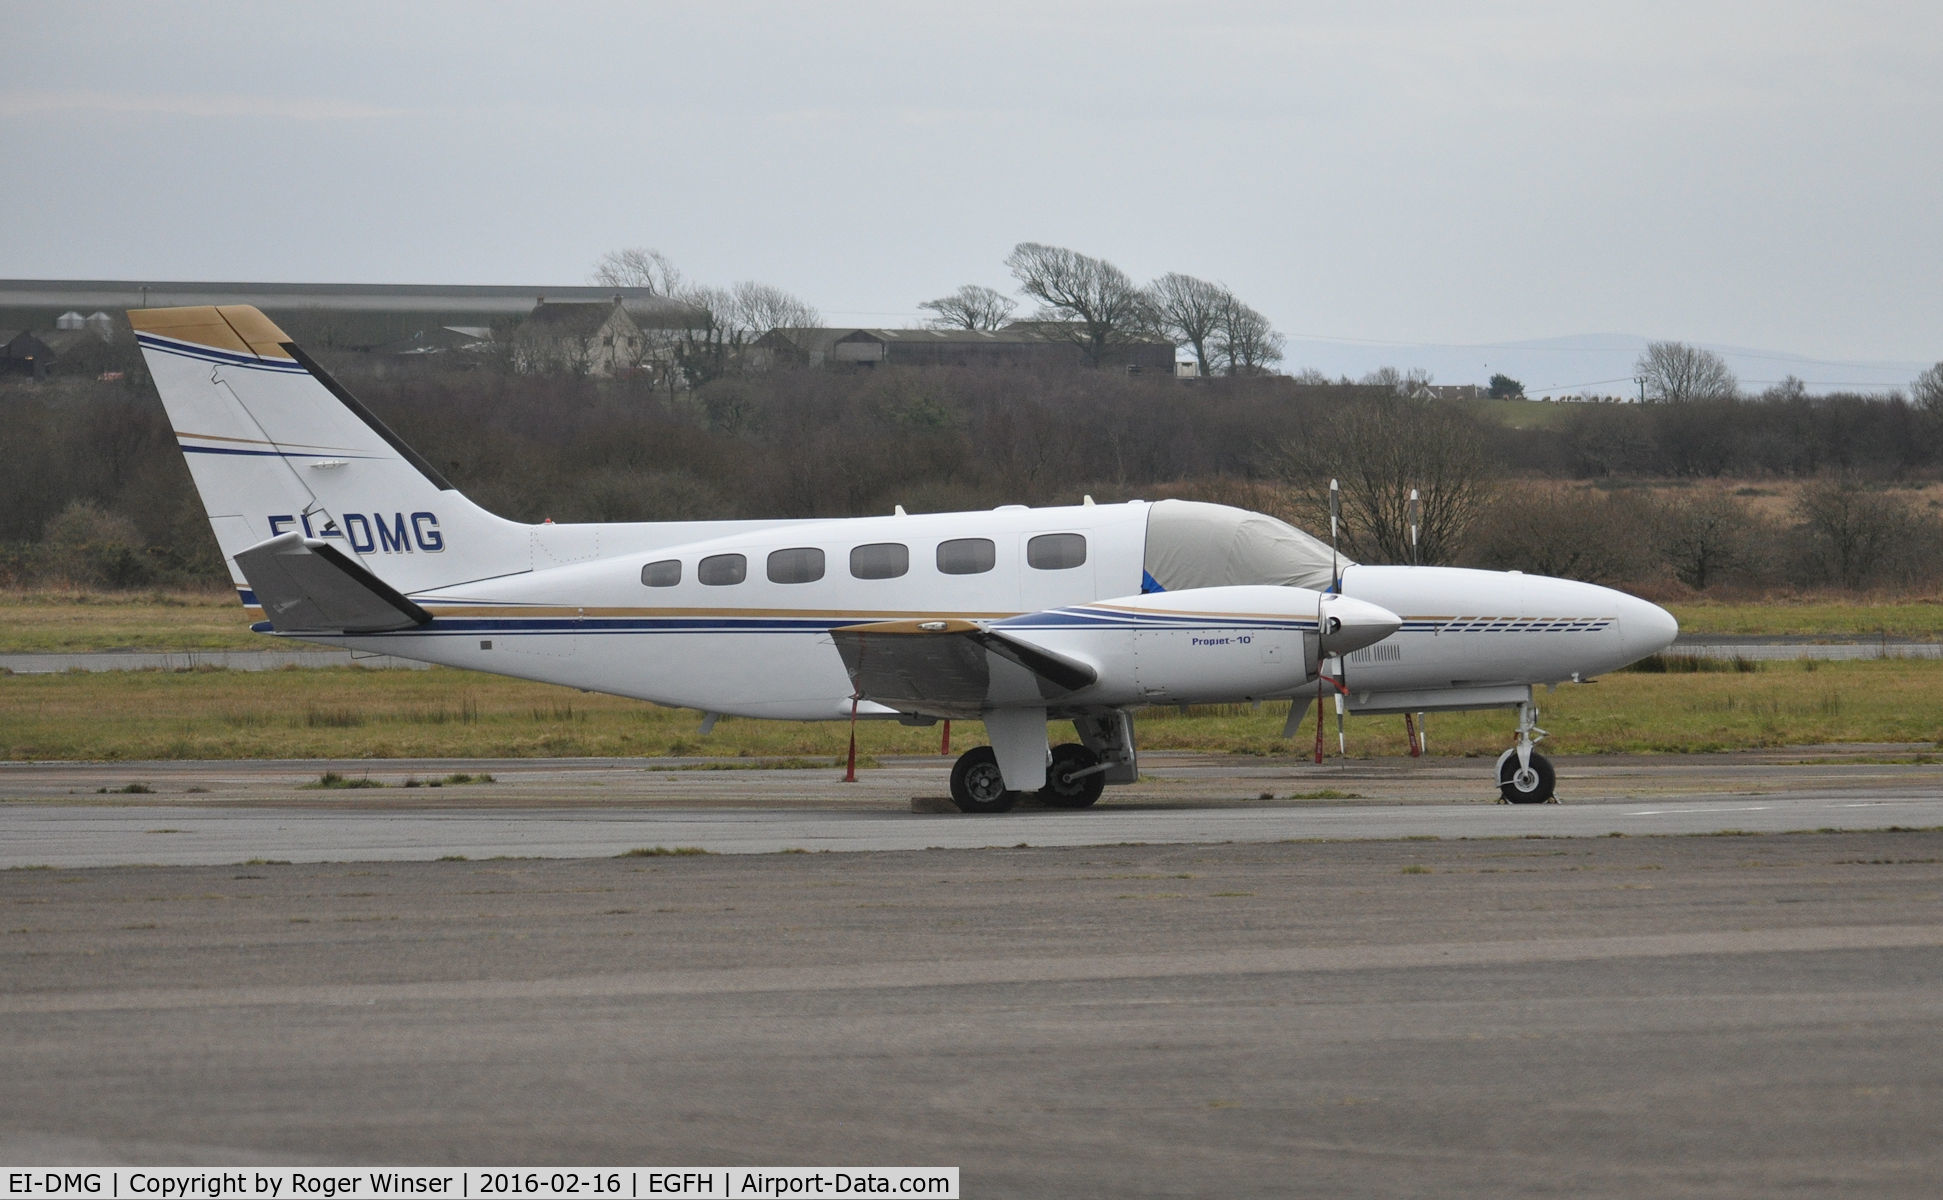 EI-DMG, 1980 Cessna 441 Conquest II C/N 441-0165, Visiting Dawn Meats Group Propjet 10 overnighting.